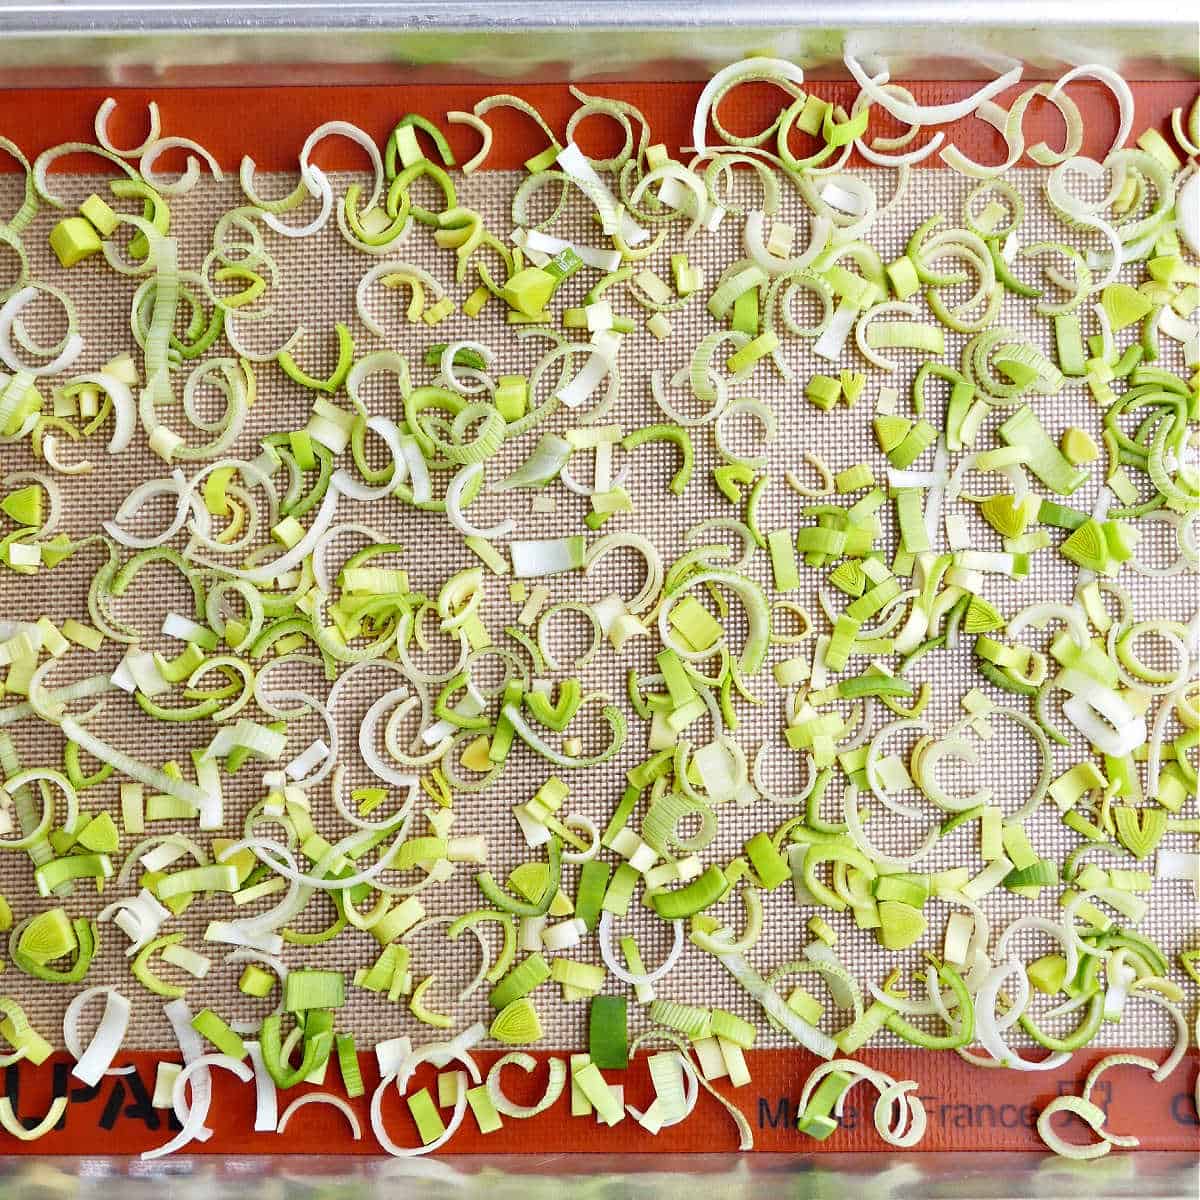 cut leeks spread out on a lined baking sheet before being frozen